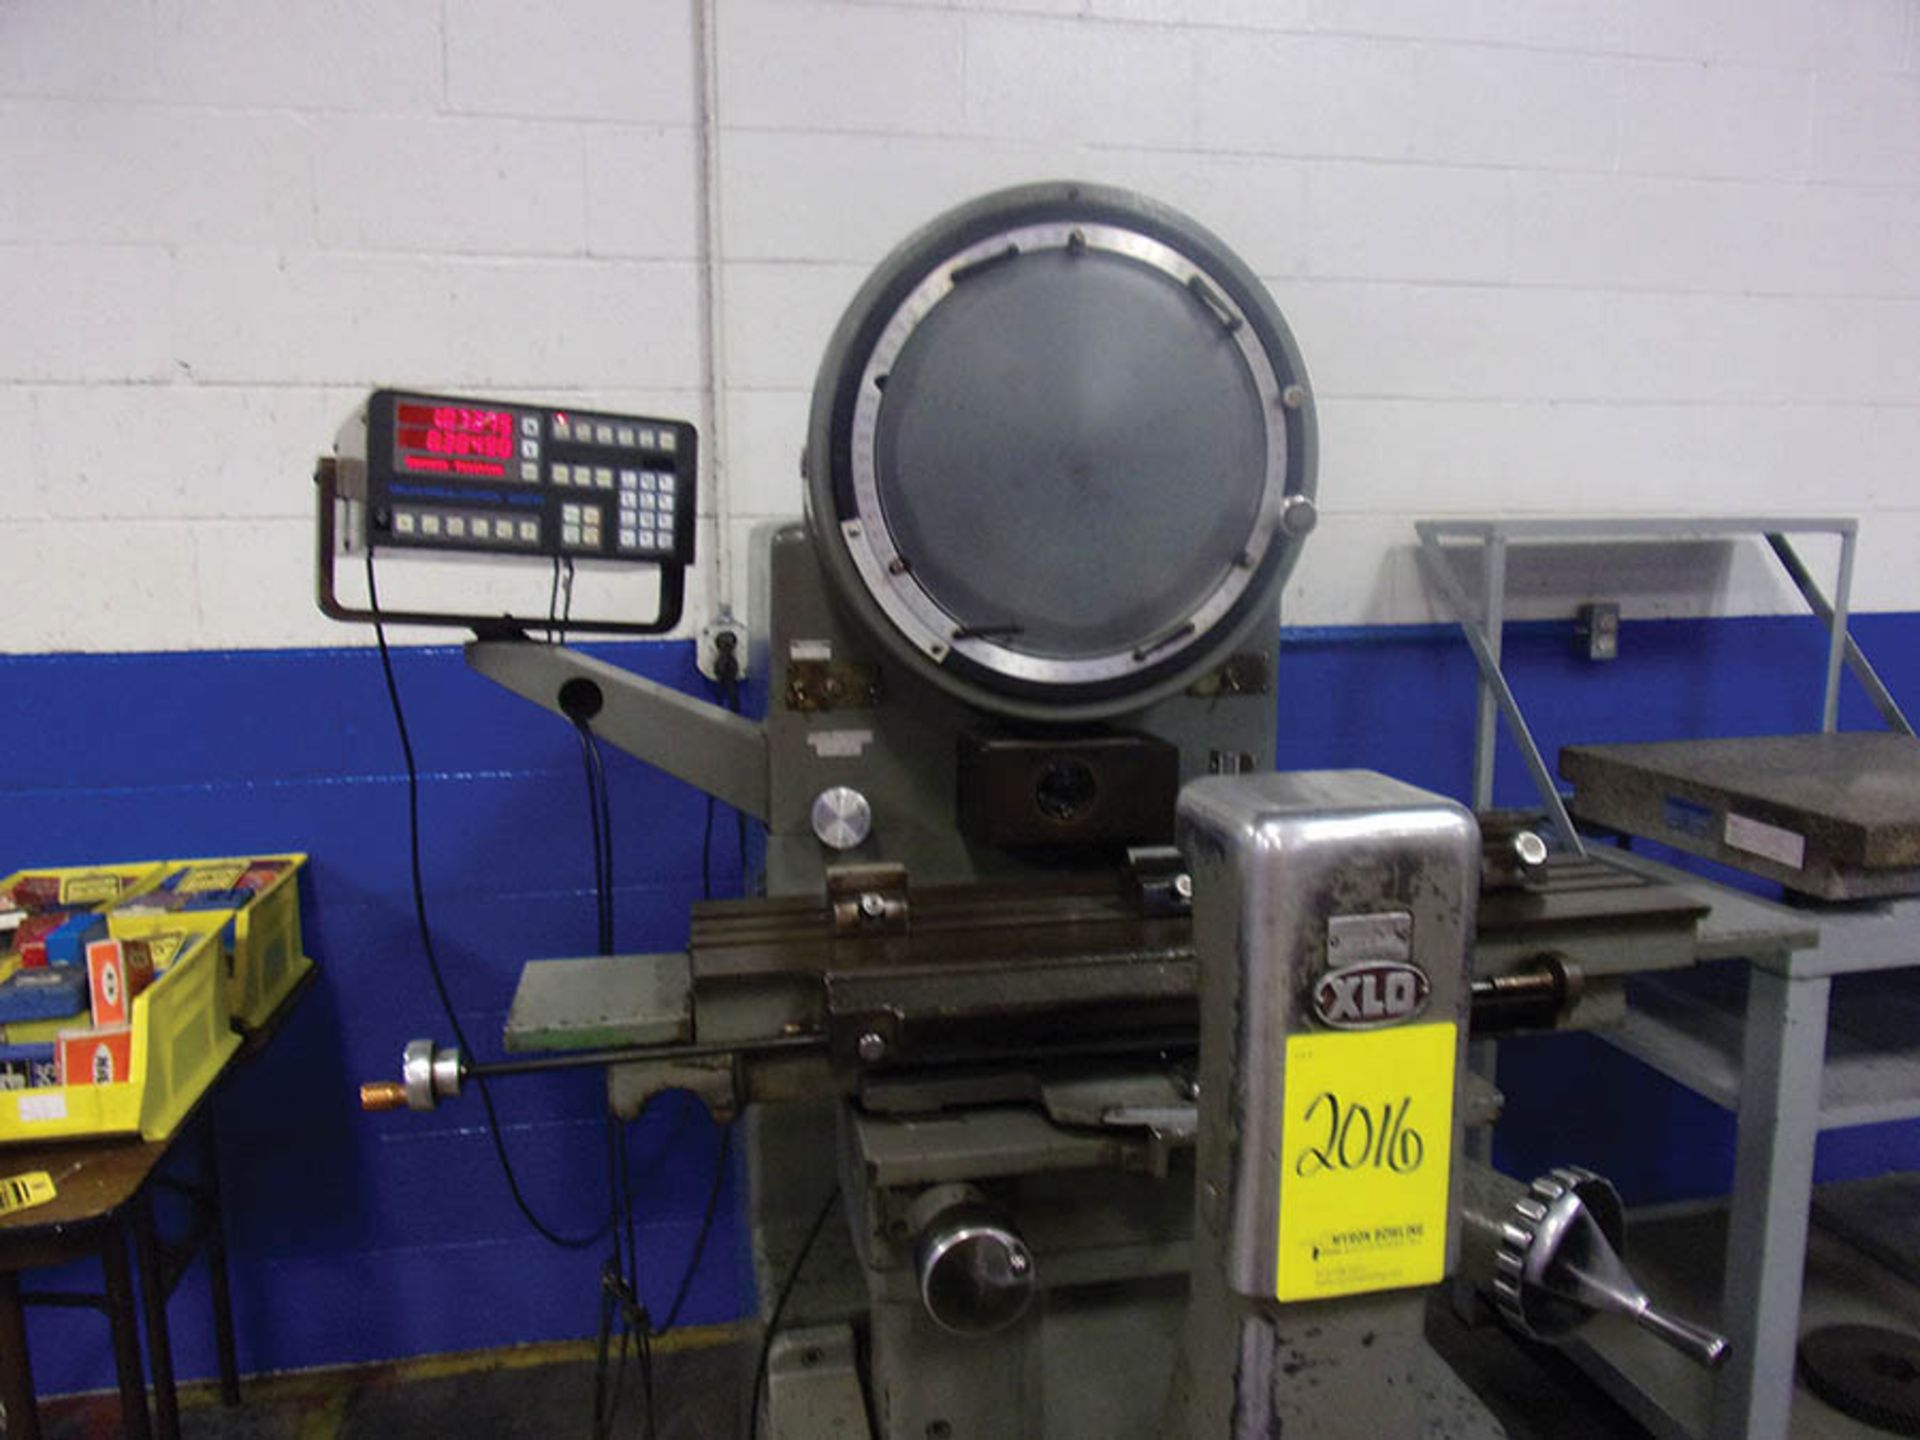 EX-CELL-O 14'' OPTICAL COMPARATOR, MODEL 14-814, S/N 8140305, AND ROCK OF AGES GRANITE SURFACE PLATE